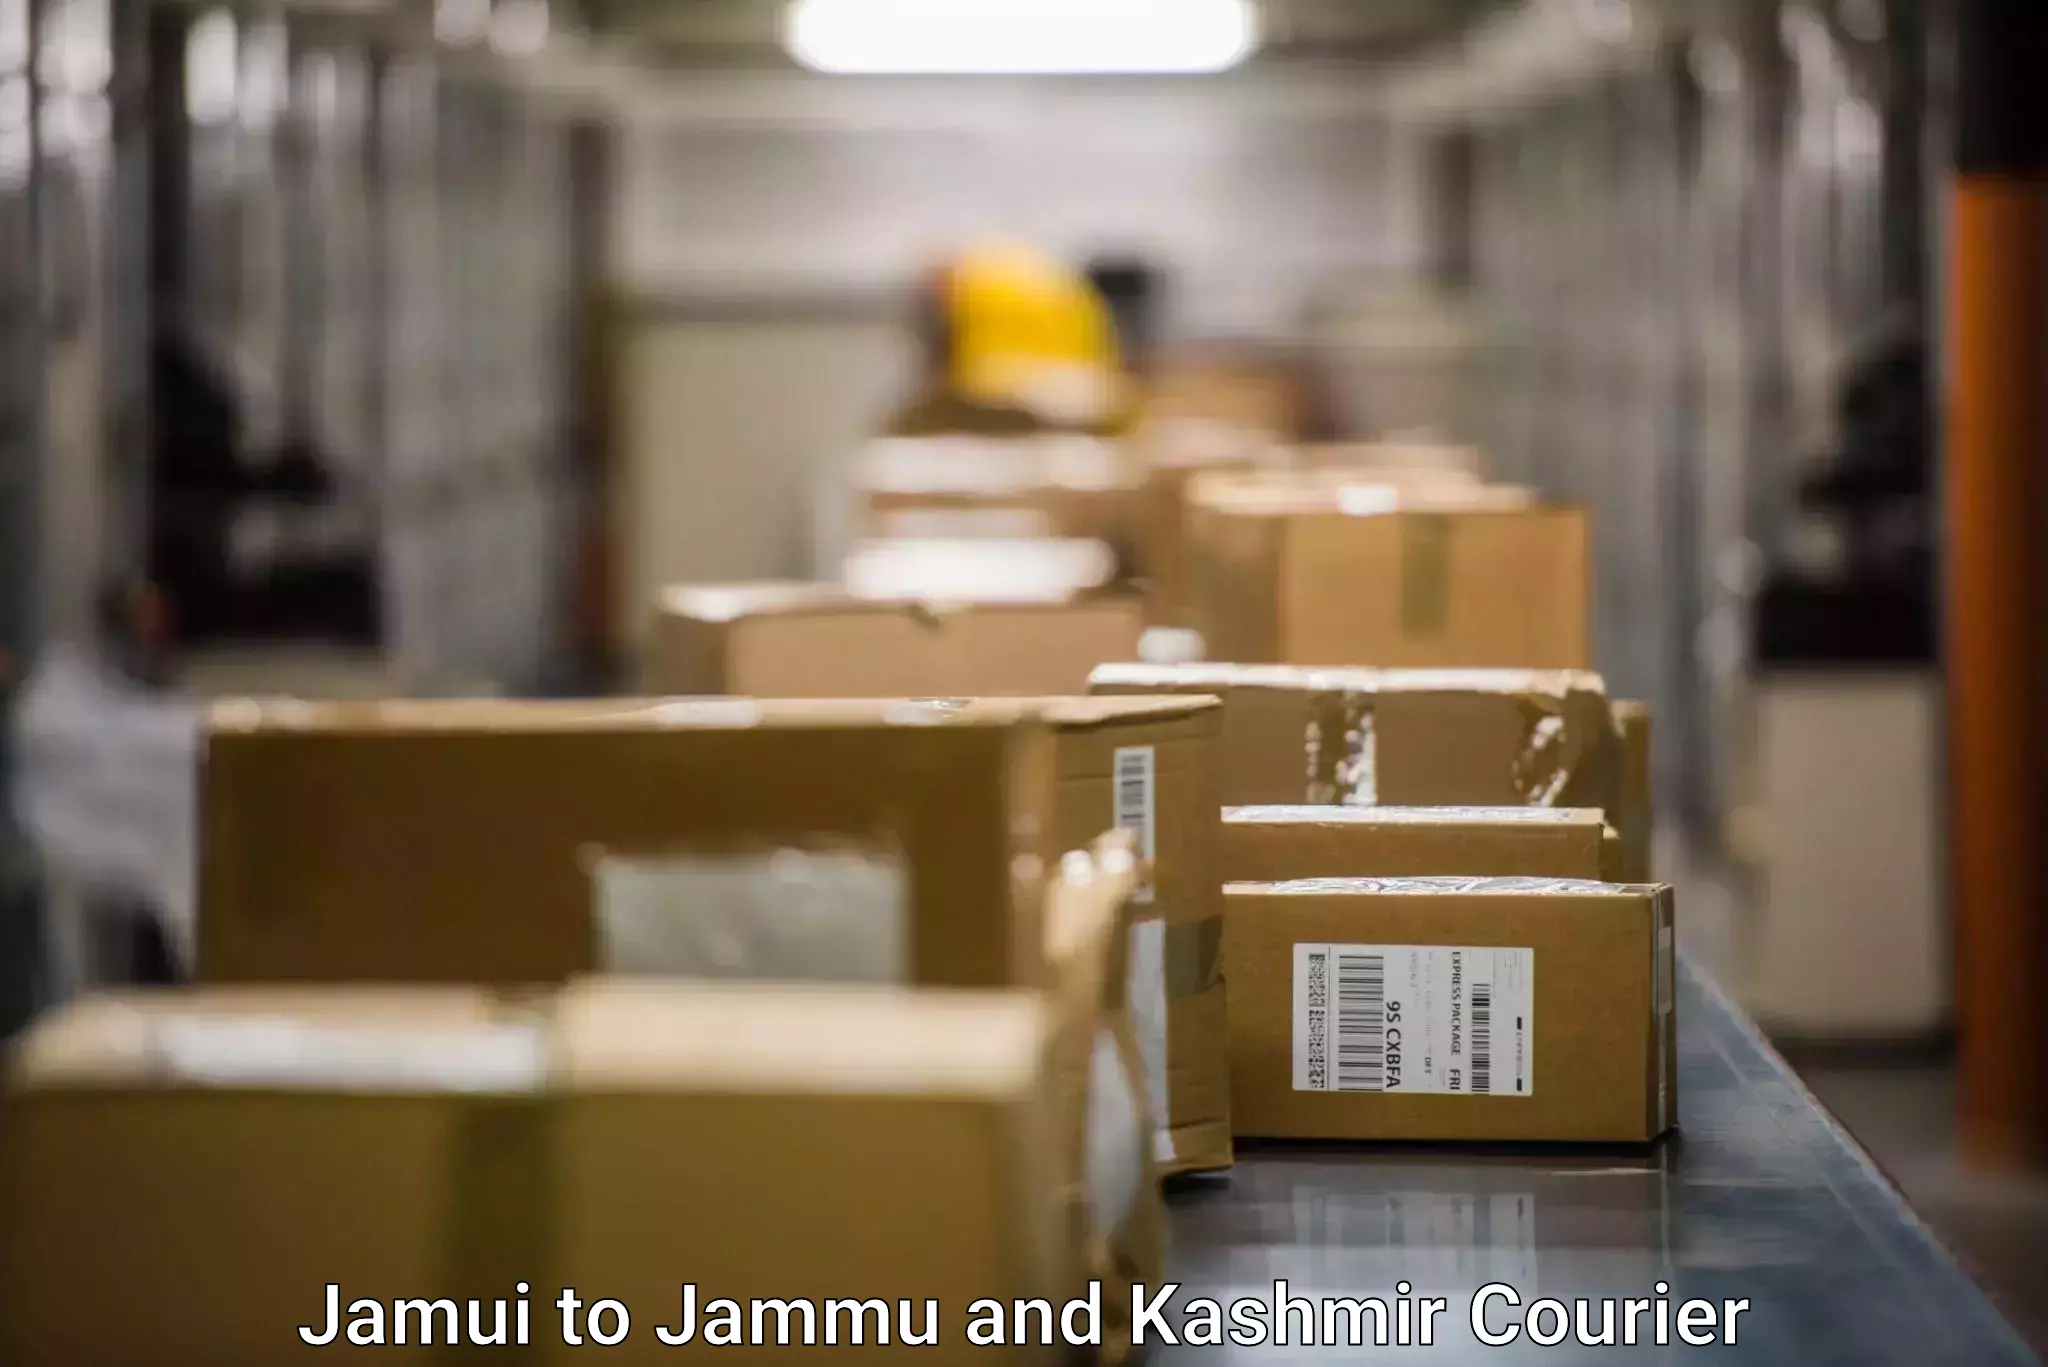 Specialized shipment handling Jamui to Leh